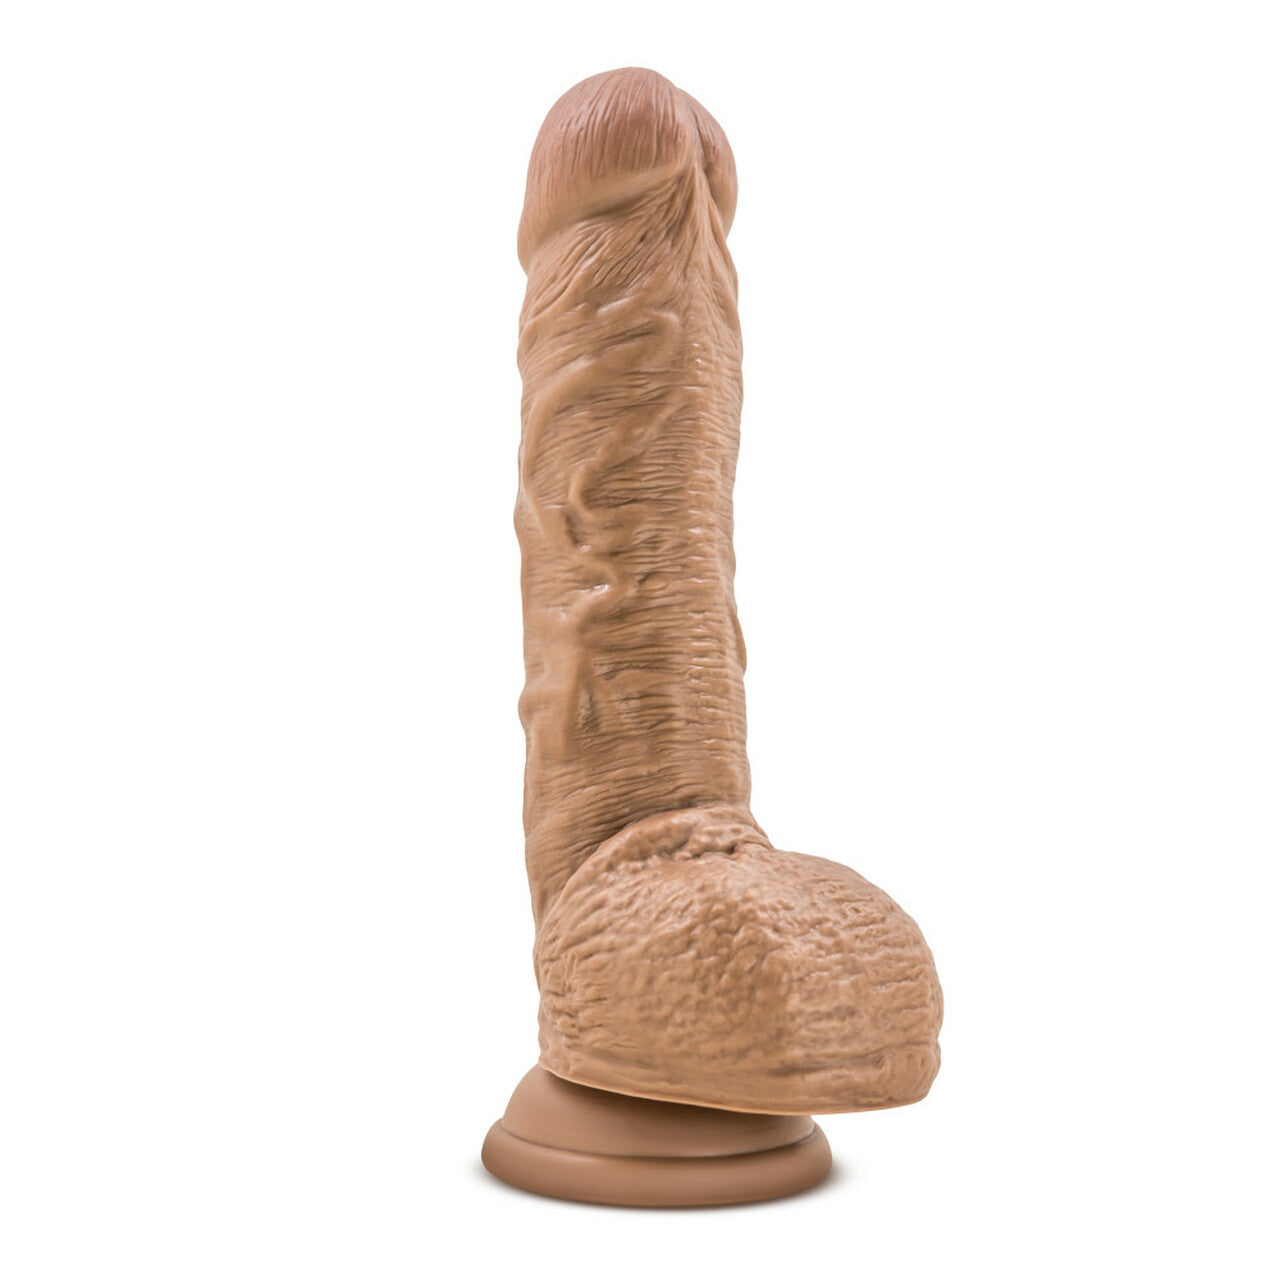 Loverboy Your Personal Trainer Realistic Dildo - Latin - Thorn & Feather Sex Toy Canada